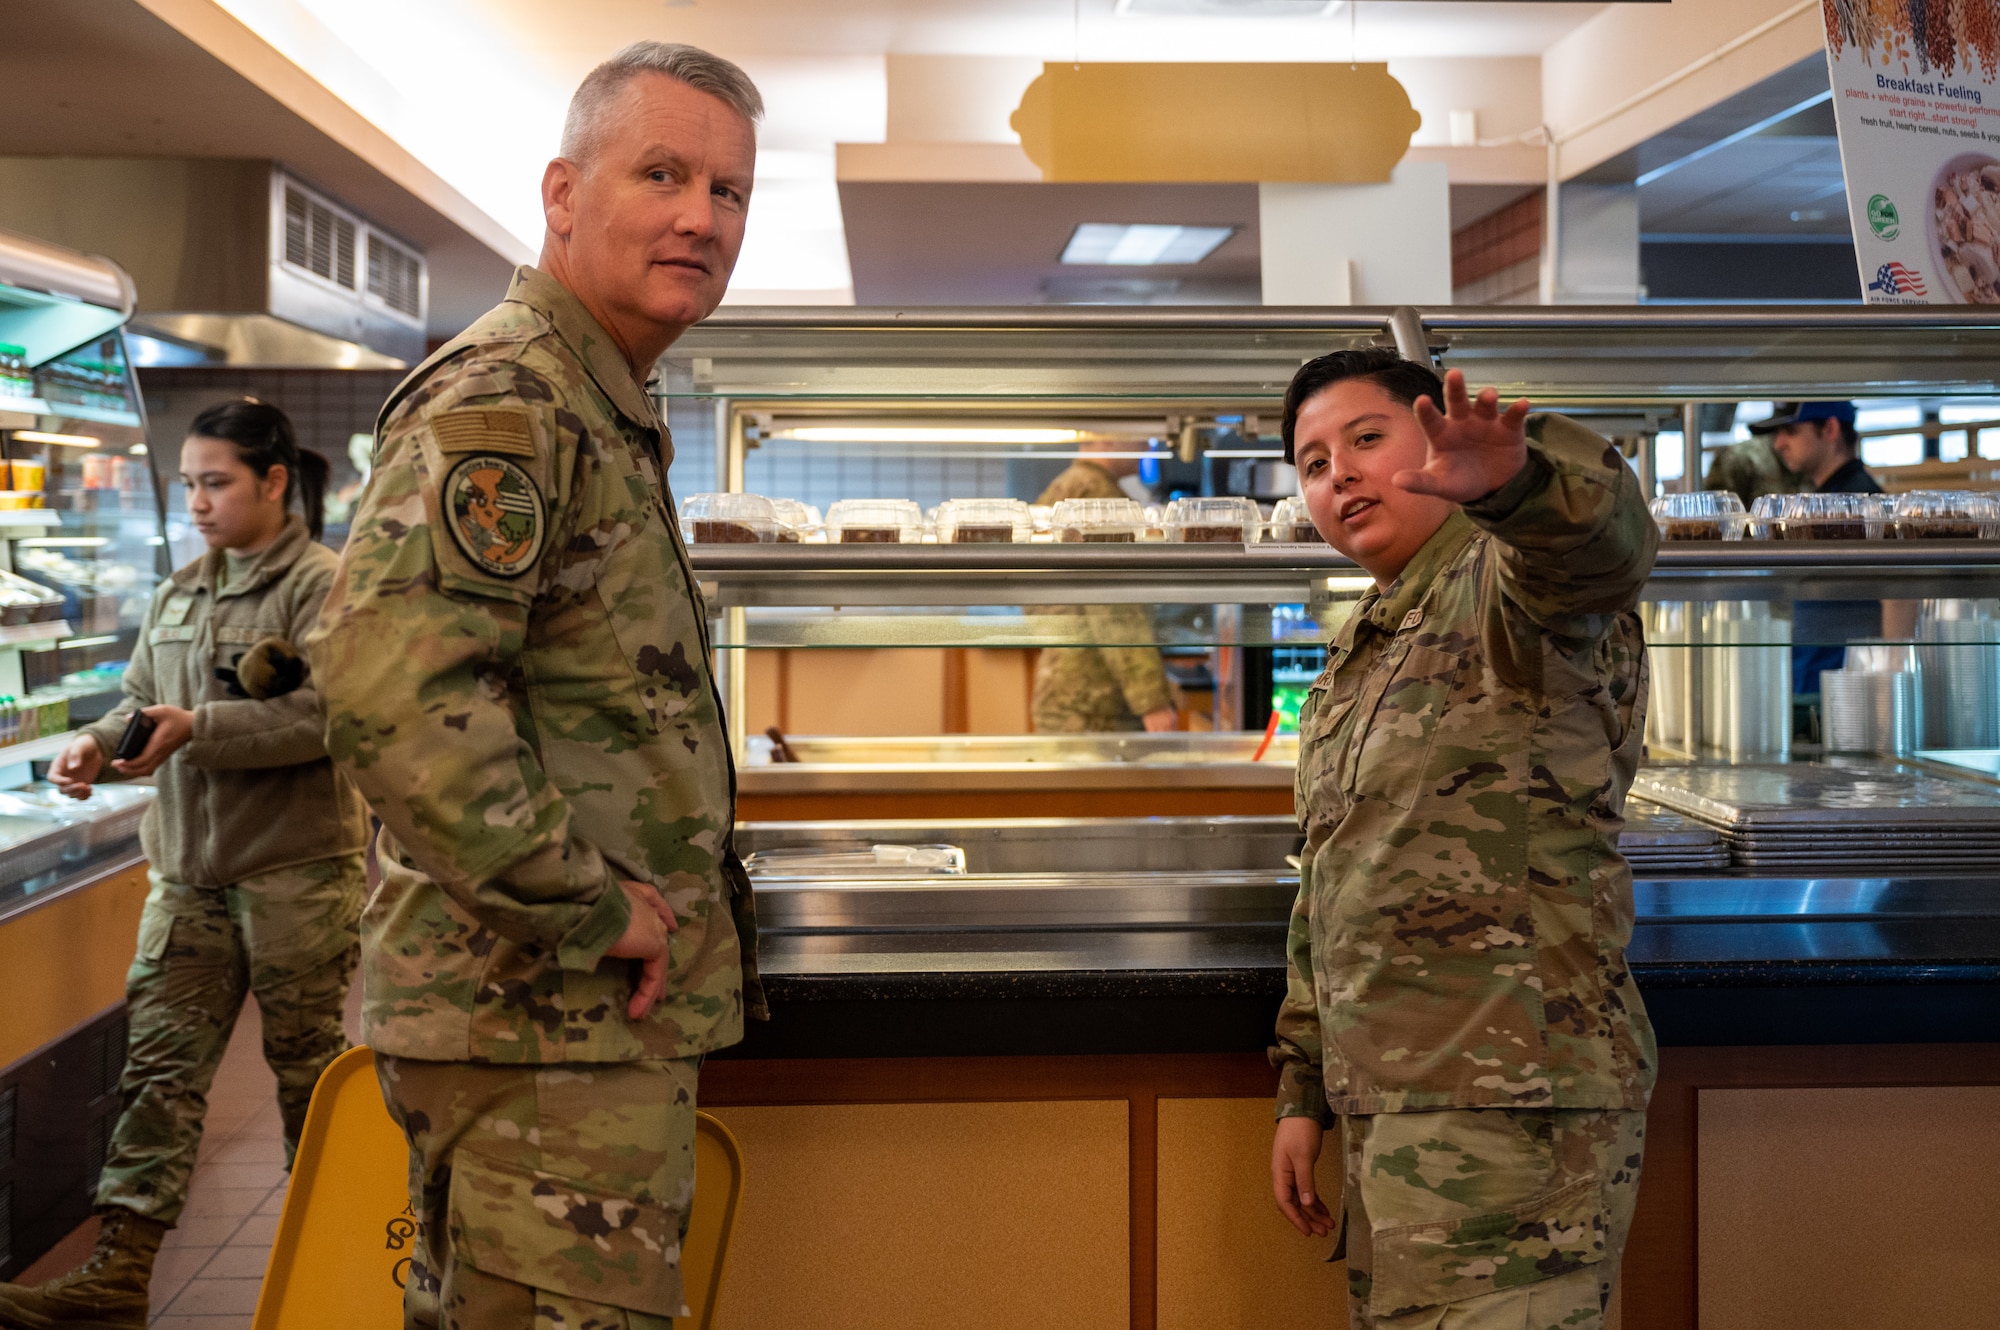 U.S. Air Force Senior Airman Victoria Camargo, a 354th Force Support Squadron assistant storeroom manager, discusses food options at the Two Seasons Dining Hall with Lt. Gen. James Jacobson, U.S. Pacific Air Forces deputy commander, during a visit to Eielson Air Force Base, Alaska, March 9, 2022.